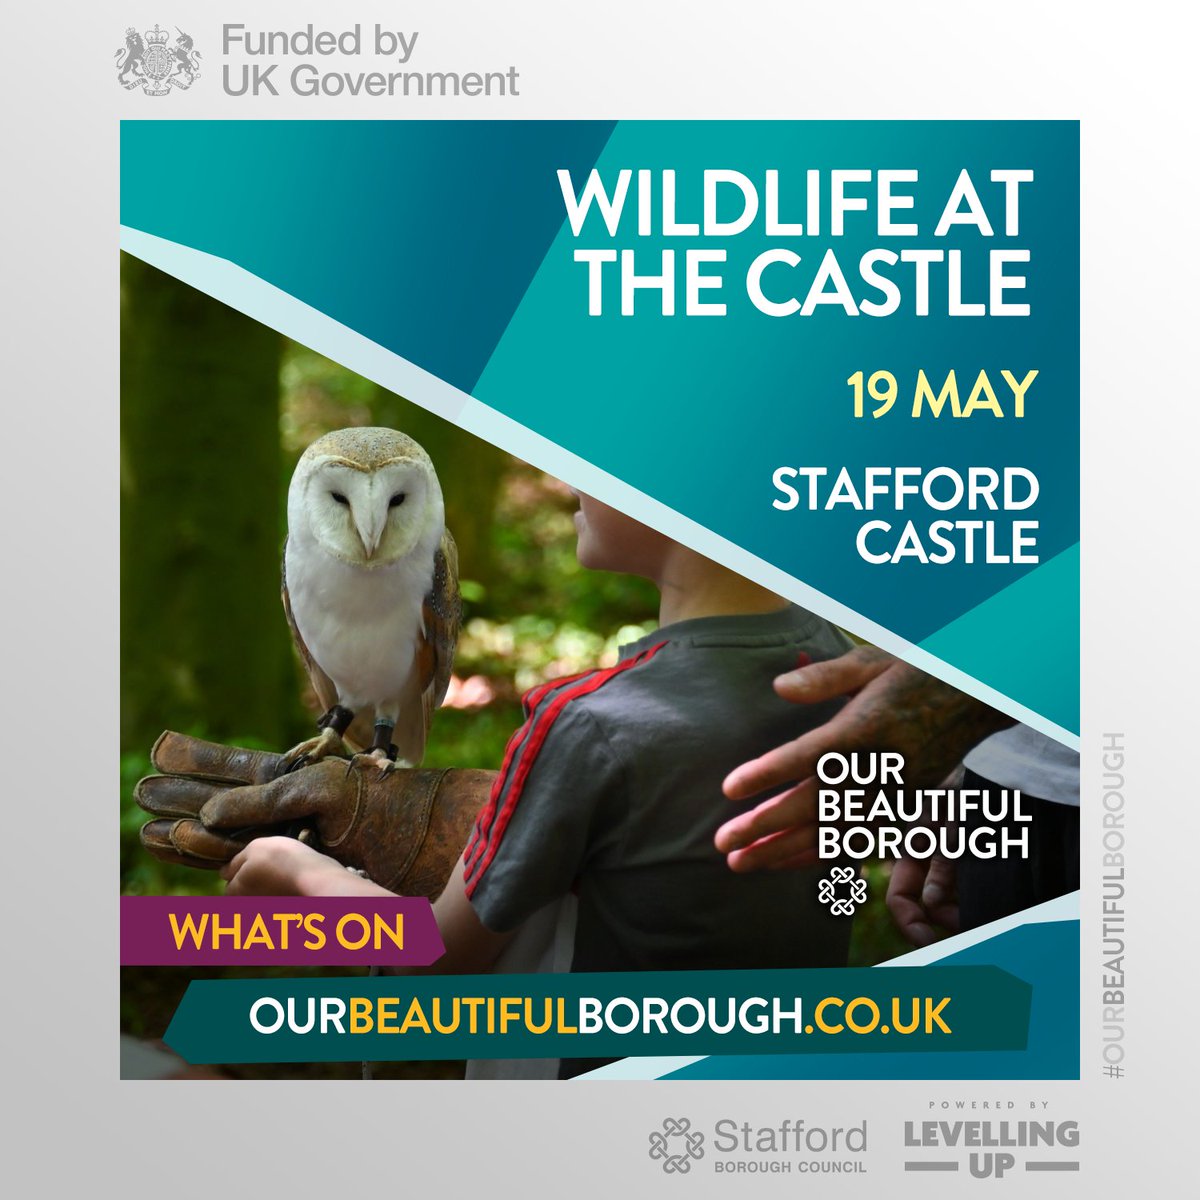 Enjoy a day of wildlife and woodland wonders at #Stafford #Castle on Sunday 19 May. With so many animals to see and interact with, plus local produce and suppliers, this is every nature lovers dream: tinyurl.com/3m3smfxj #DaysOut #FamilyFun #OurBeautifulBorough @HistoricStaffs